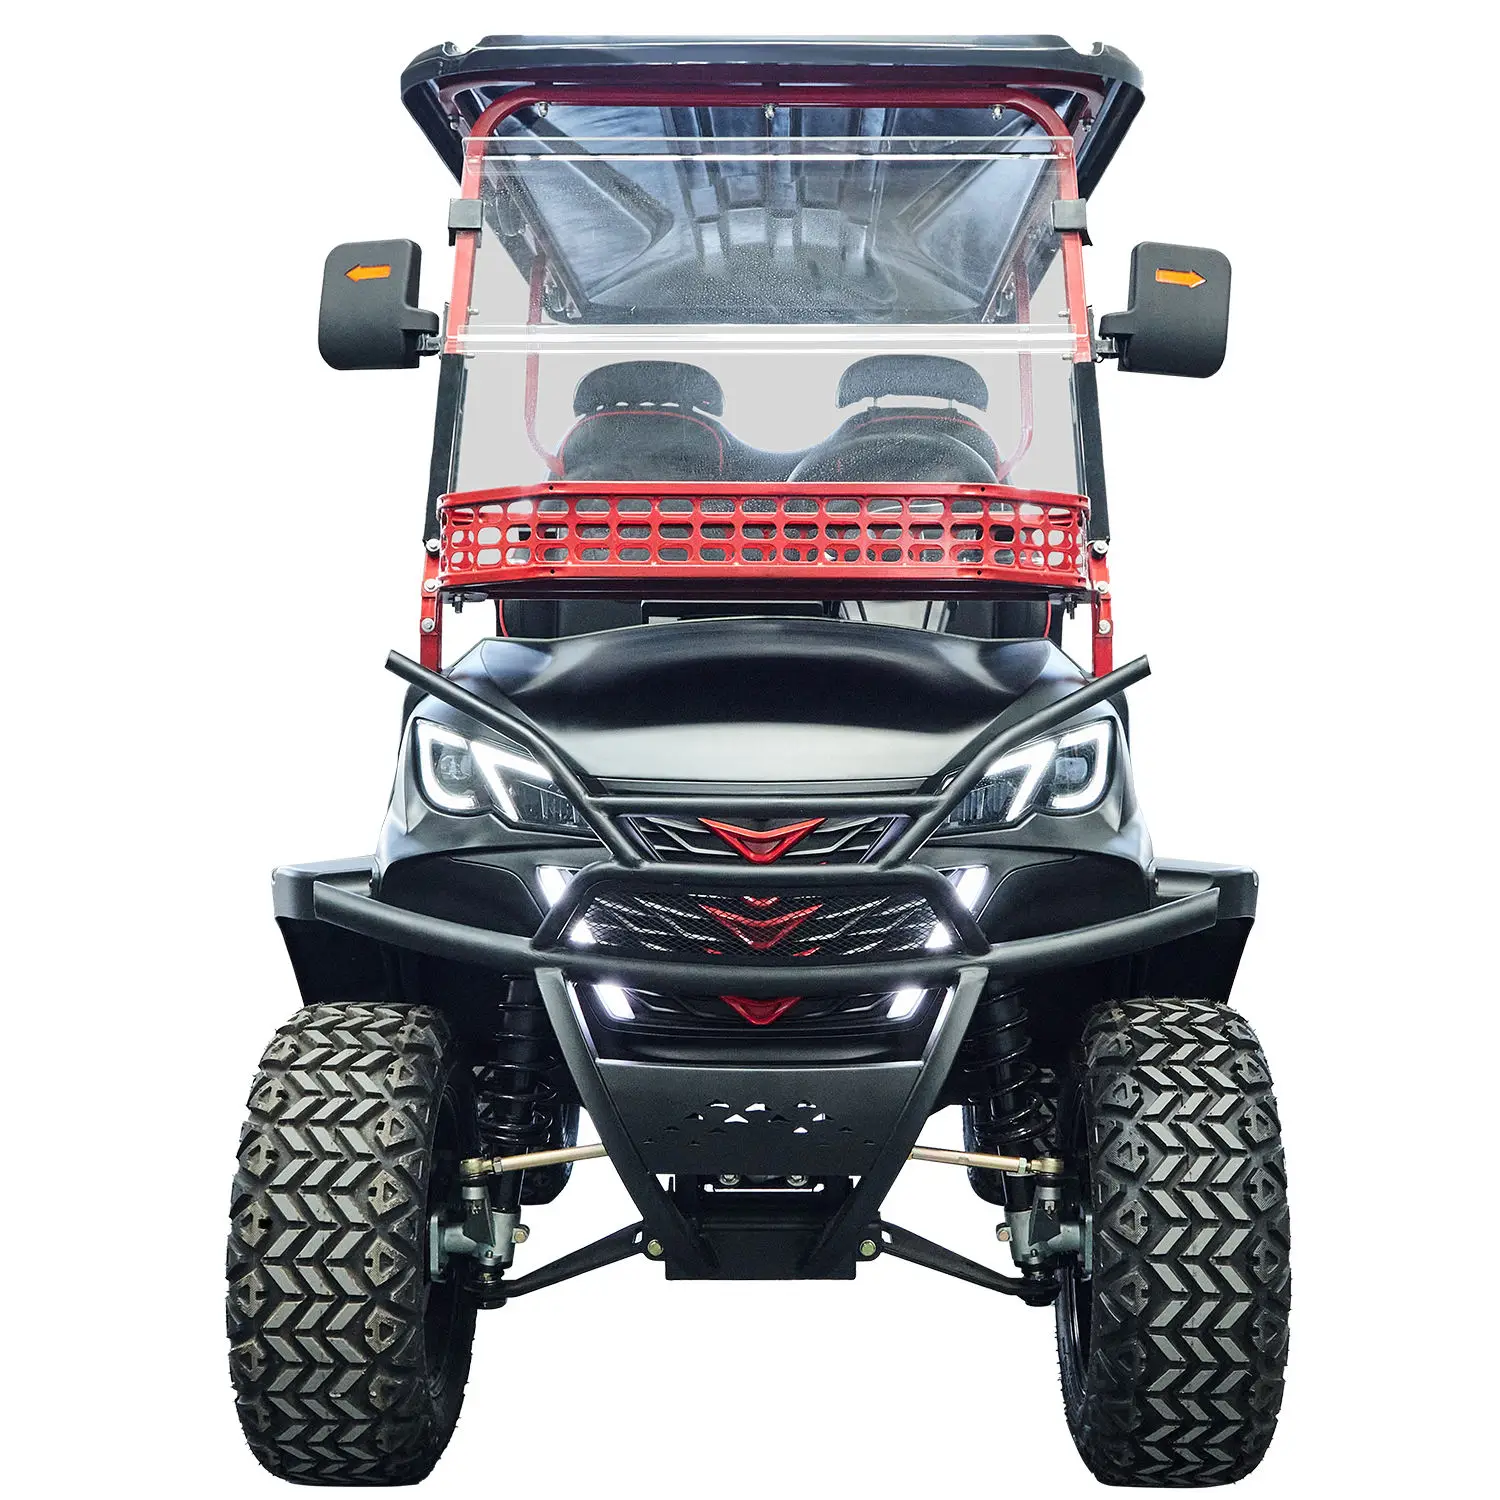 

Custom New Energy Club Car Hunting Buggy 6 Seater Electric Street Legal Golf Cart Lifted Golf Cart With Lithium Battery